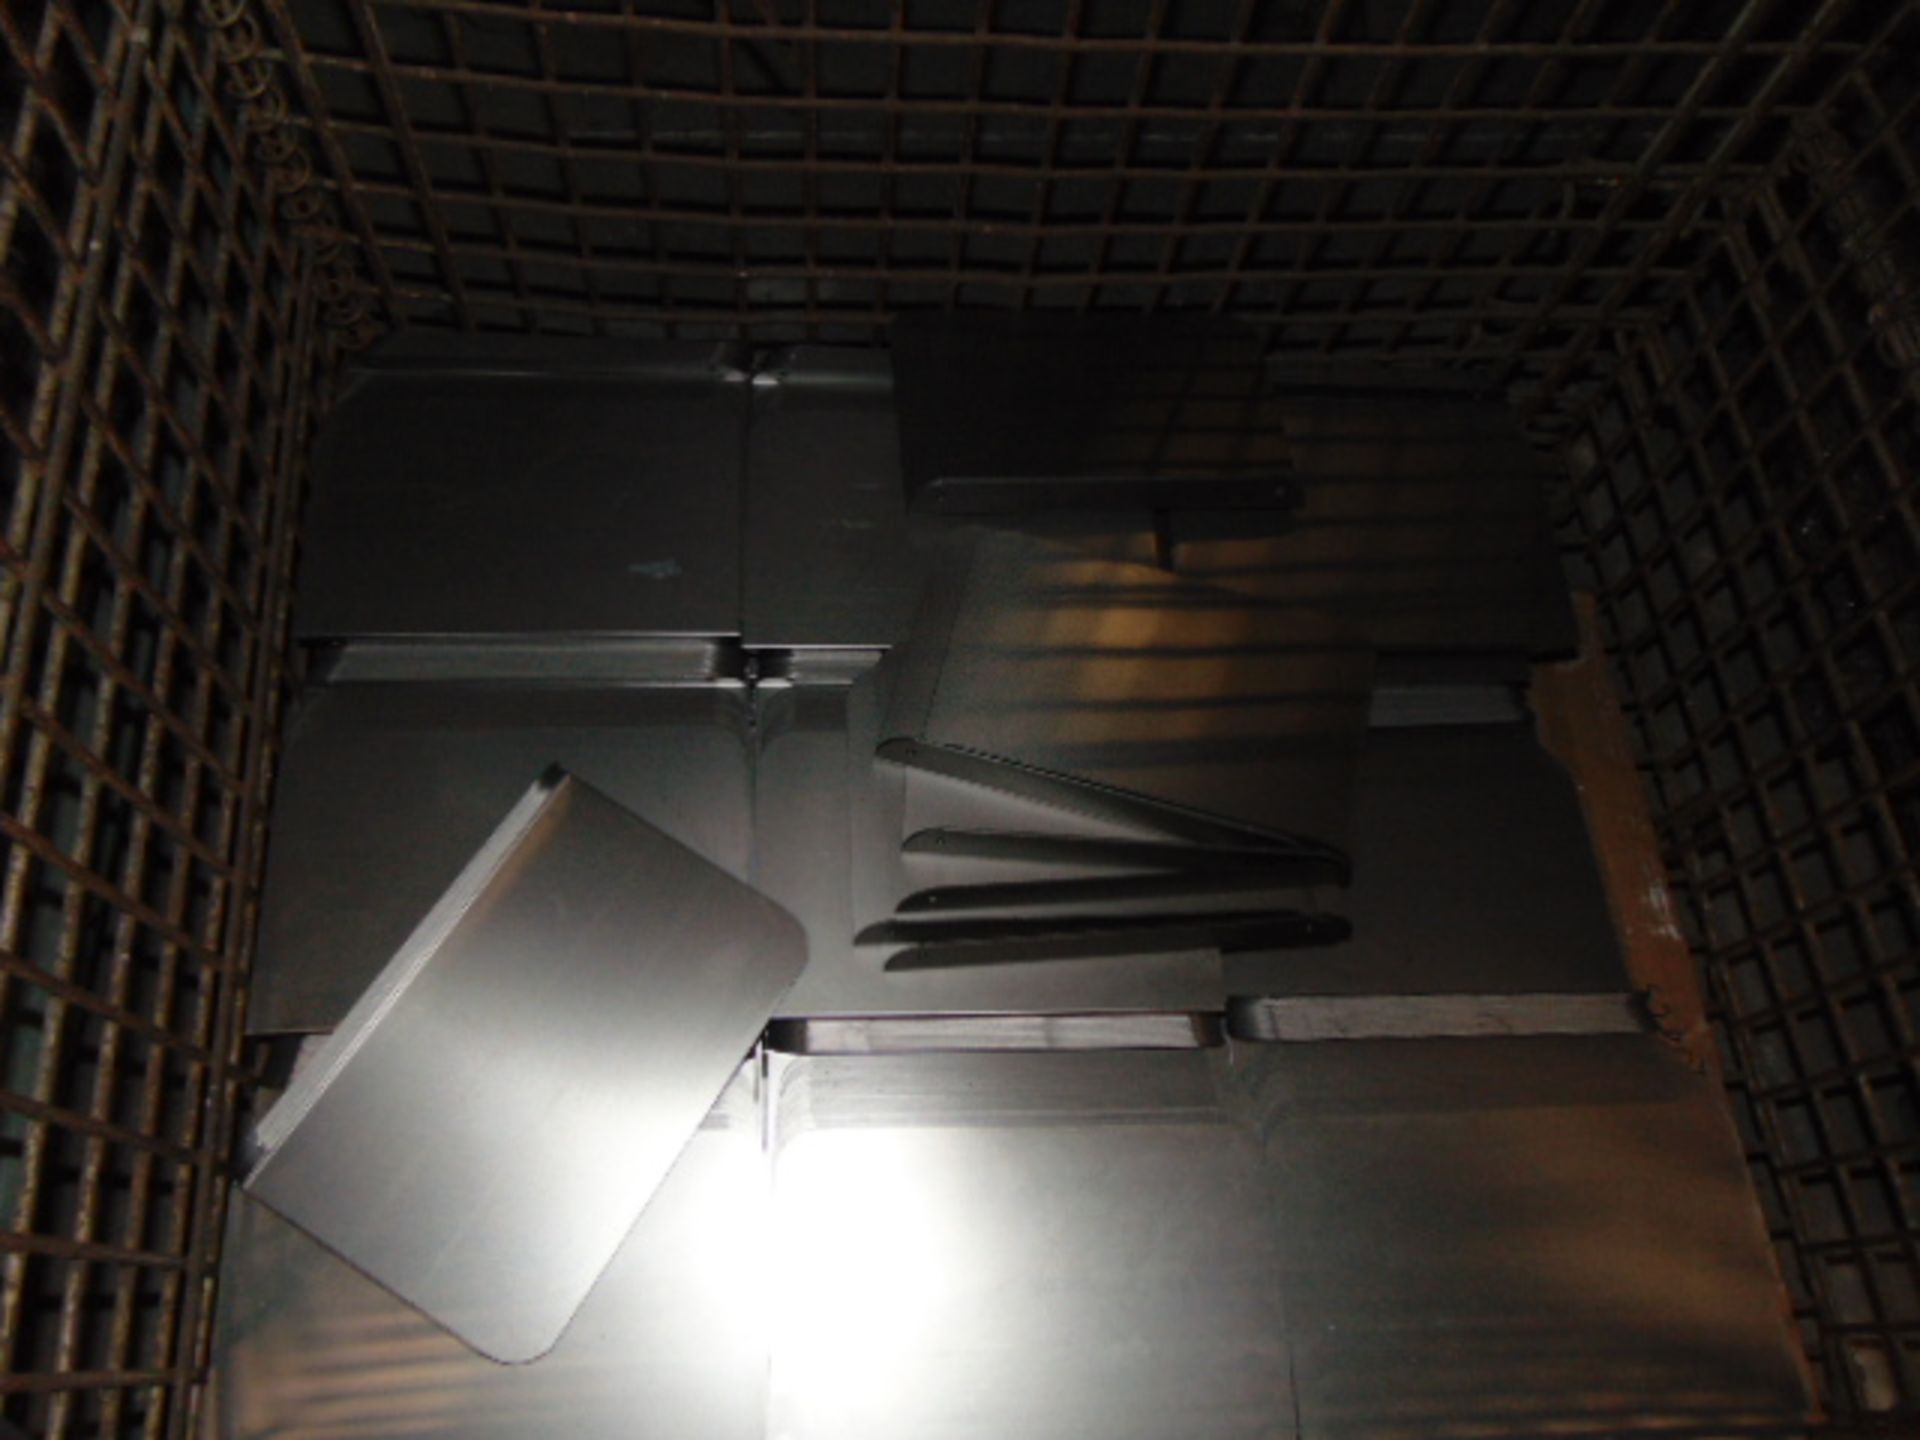 LOT CONSISTING OF: assorted steel in process parts, wire baskets & cardboard (no dies or racks) ( - Image 28 of 39